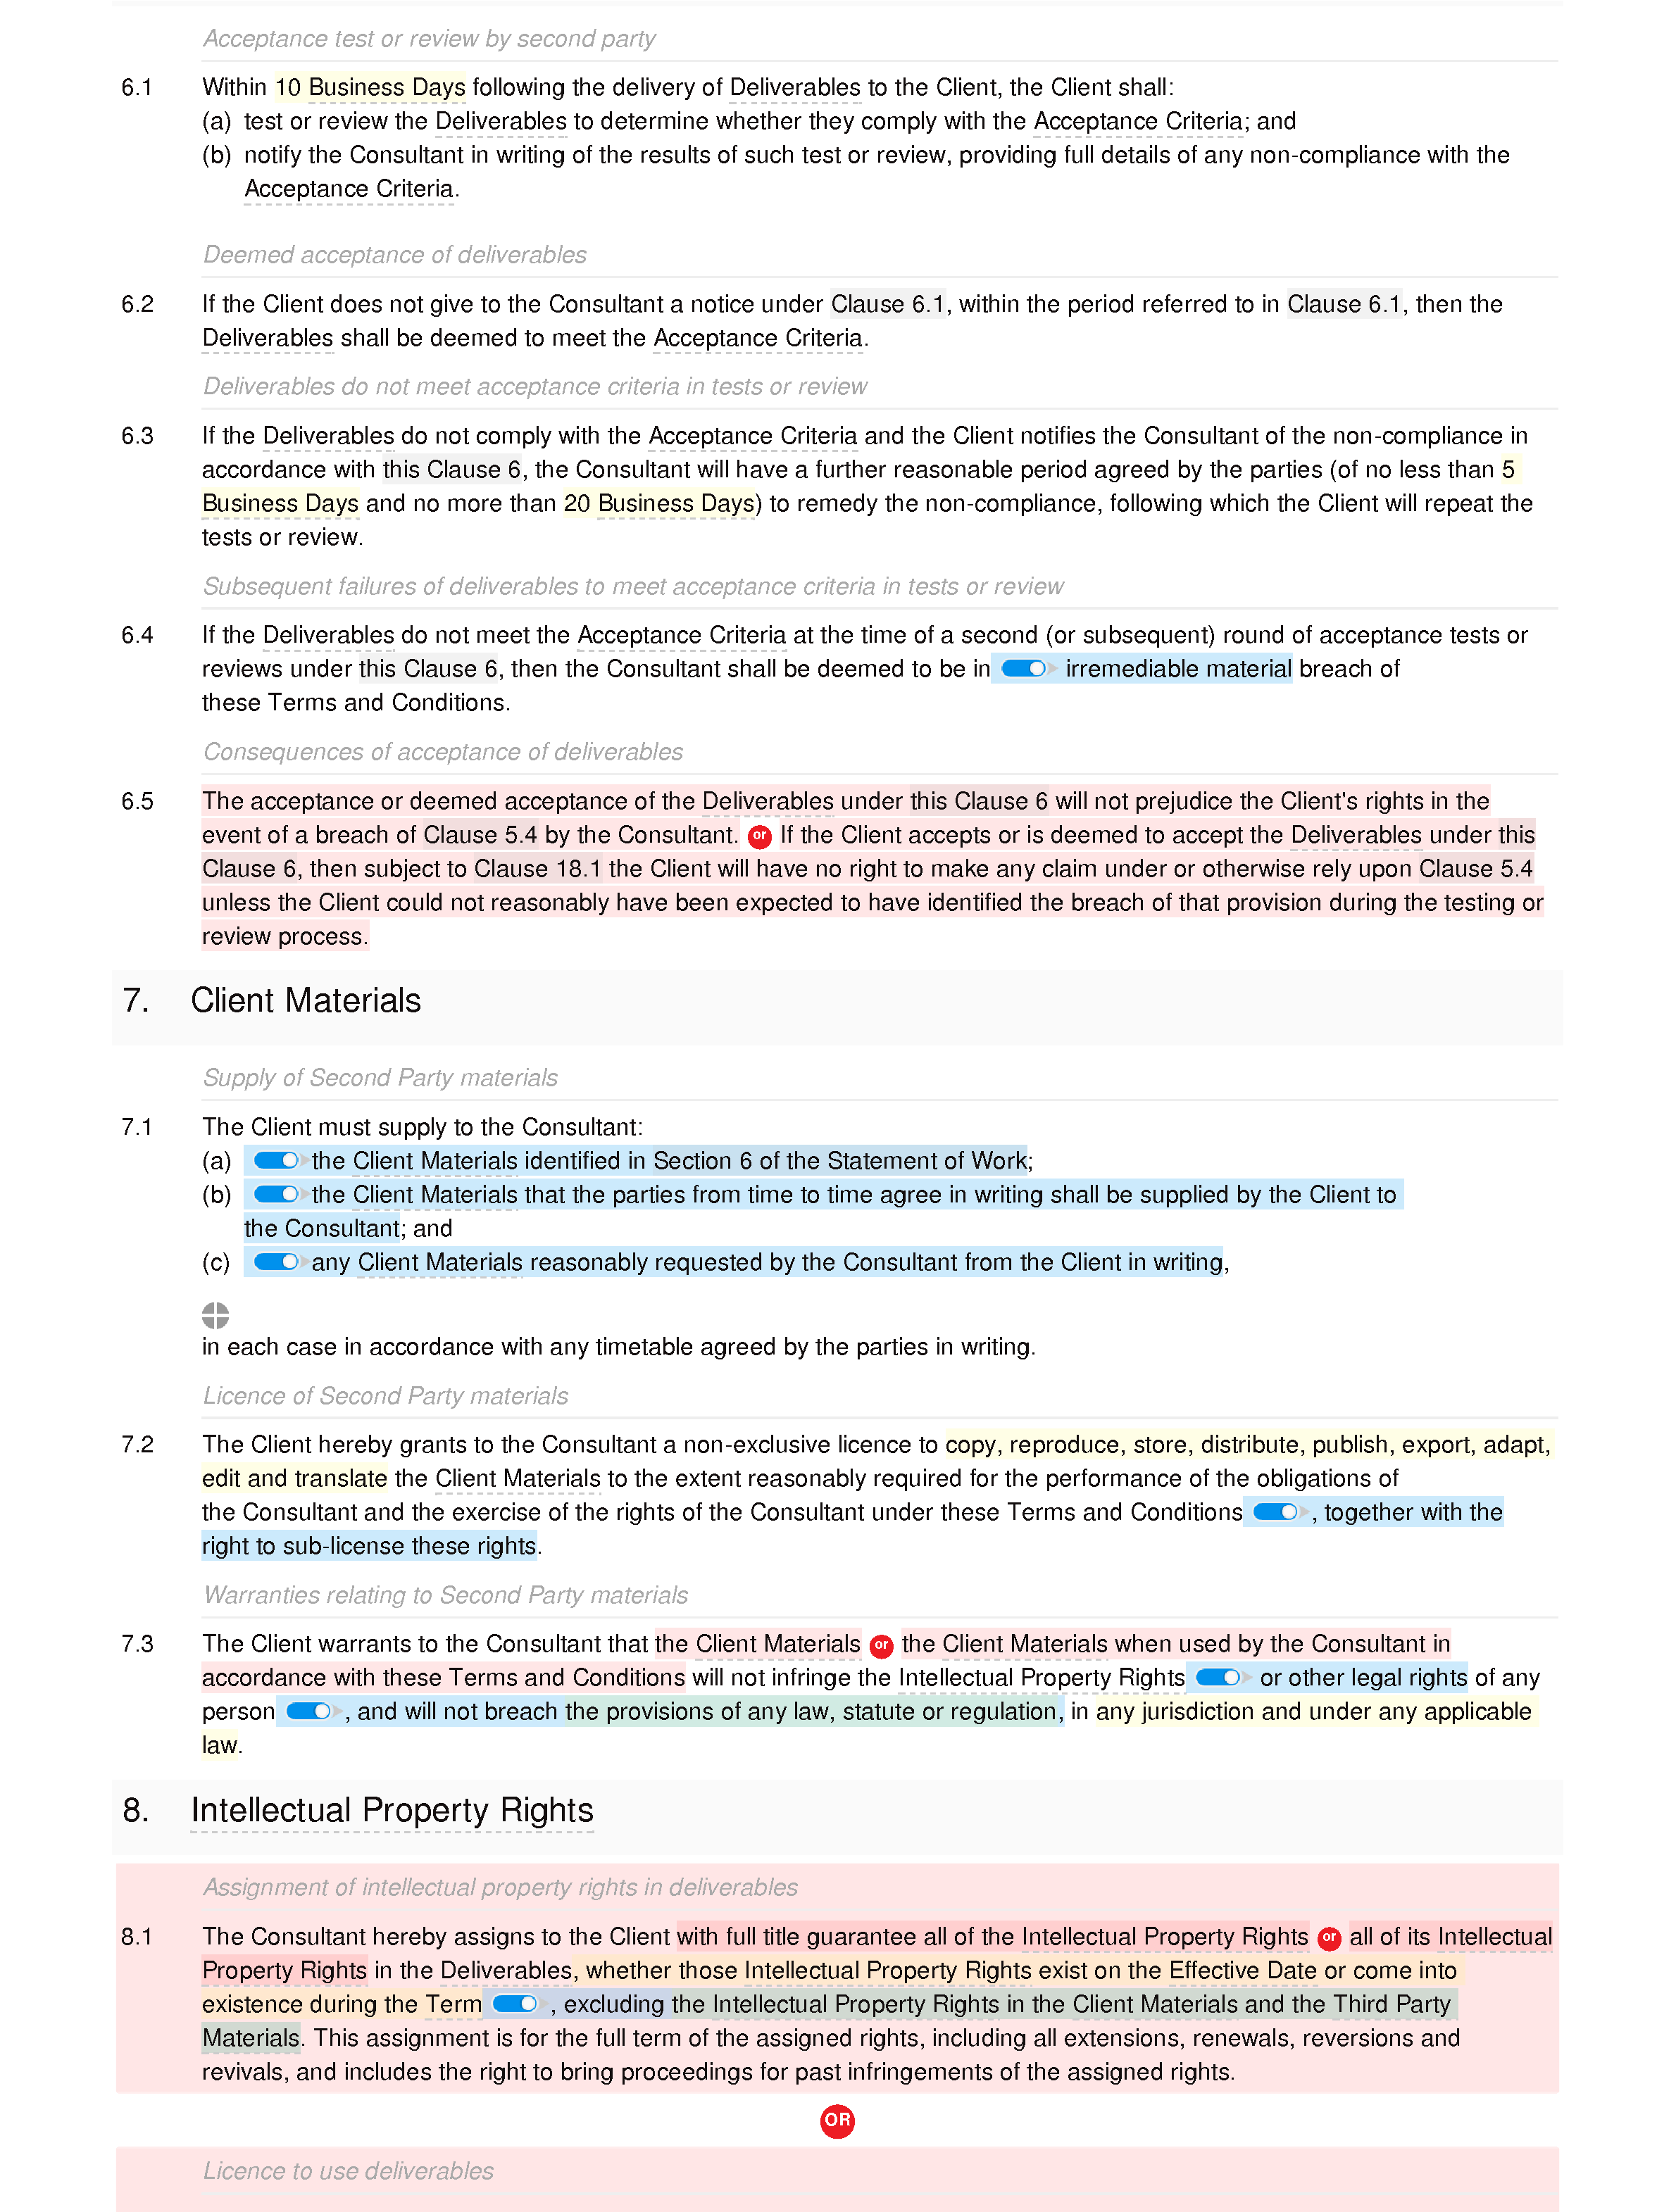 Consultancy terms and conditions (premium) document editor preview